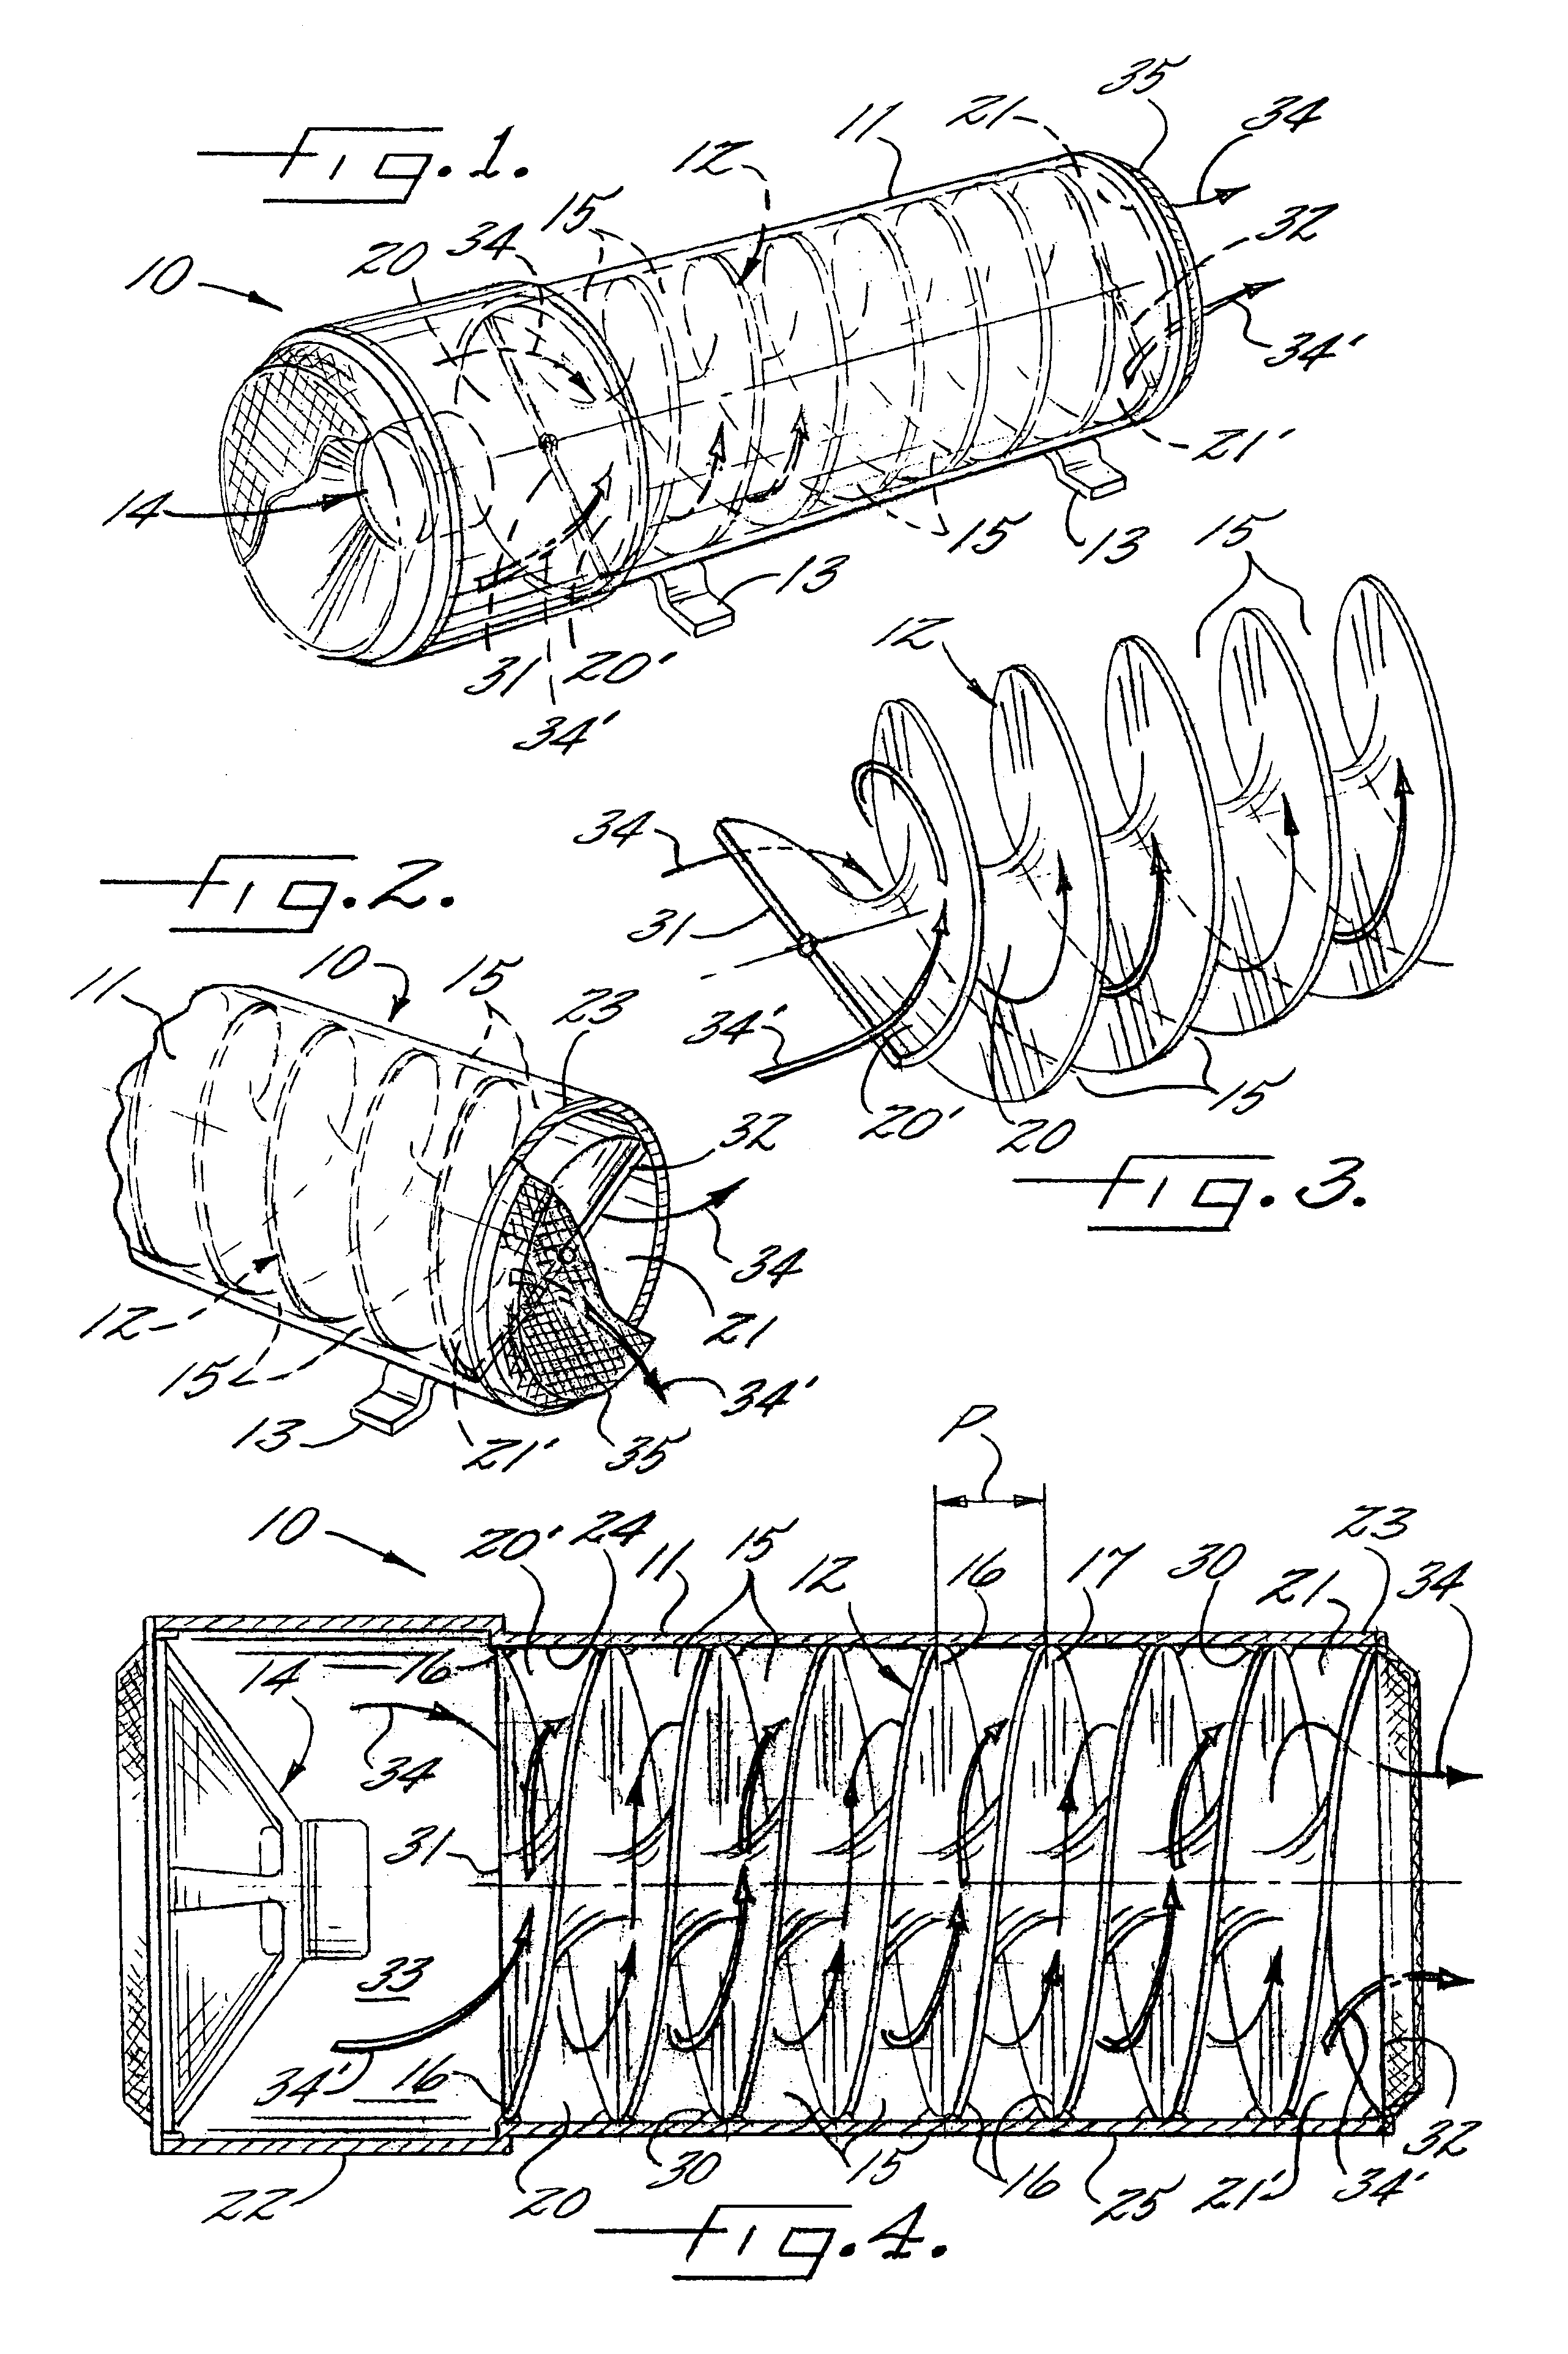 Apparatus for increasing the quality of sound from an acoustic source